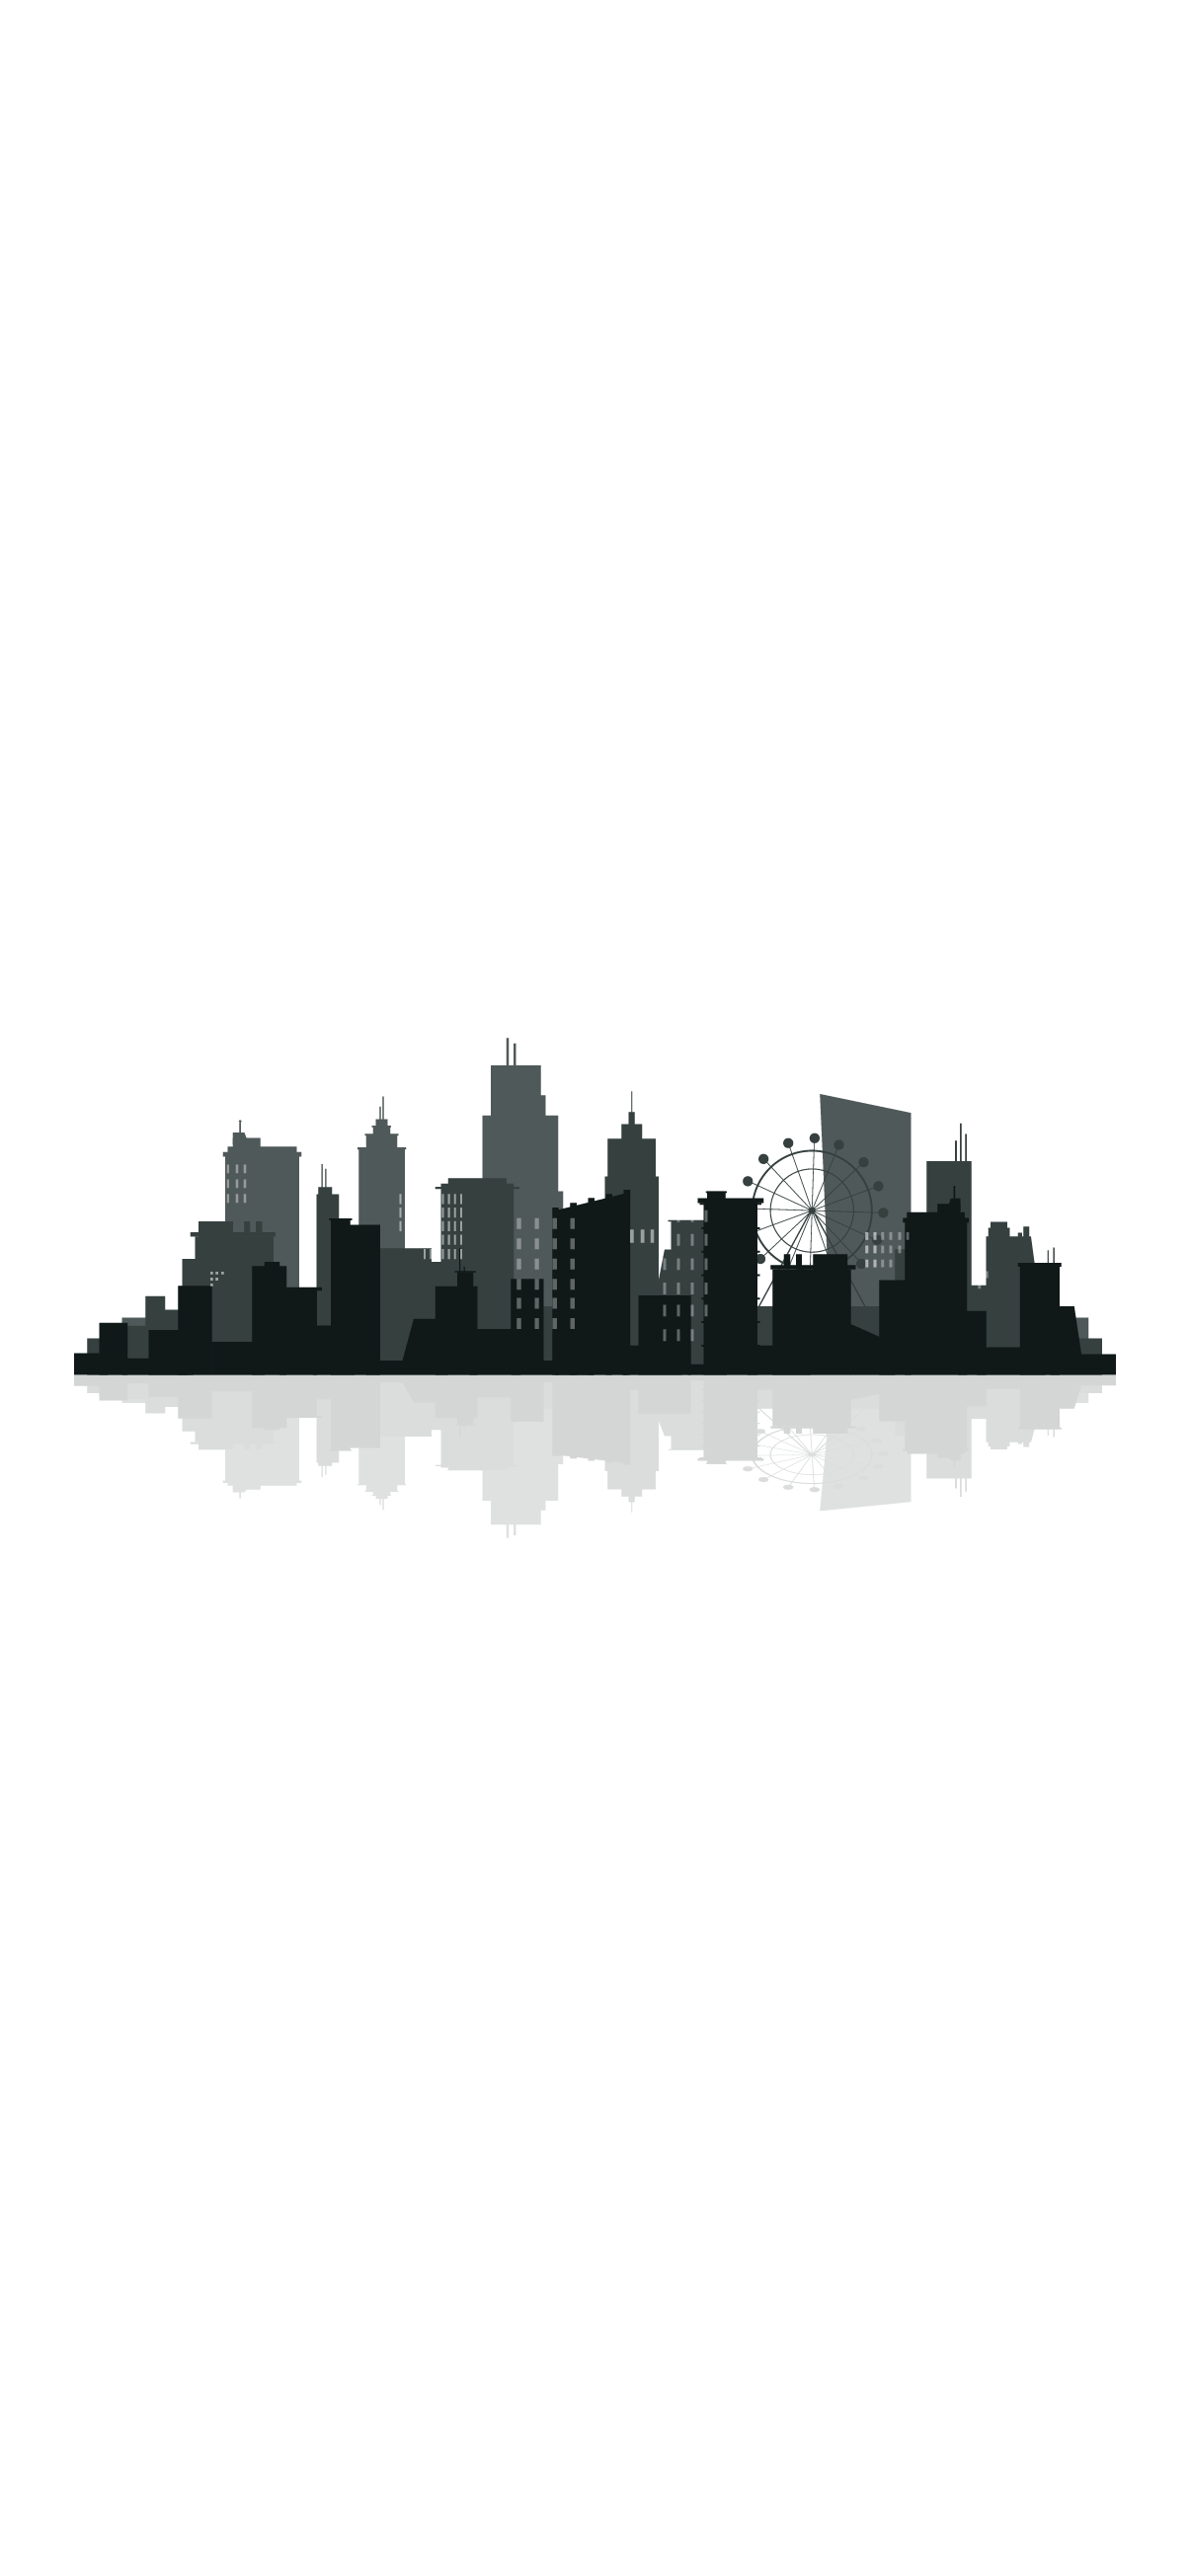 A city skyline with buildings and water - Minimalist